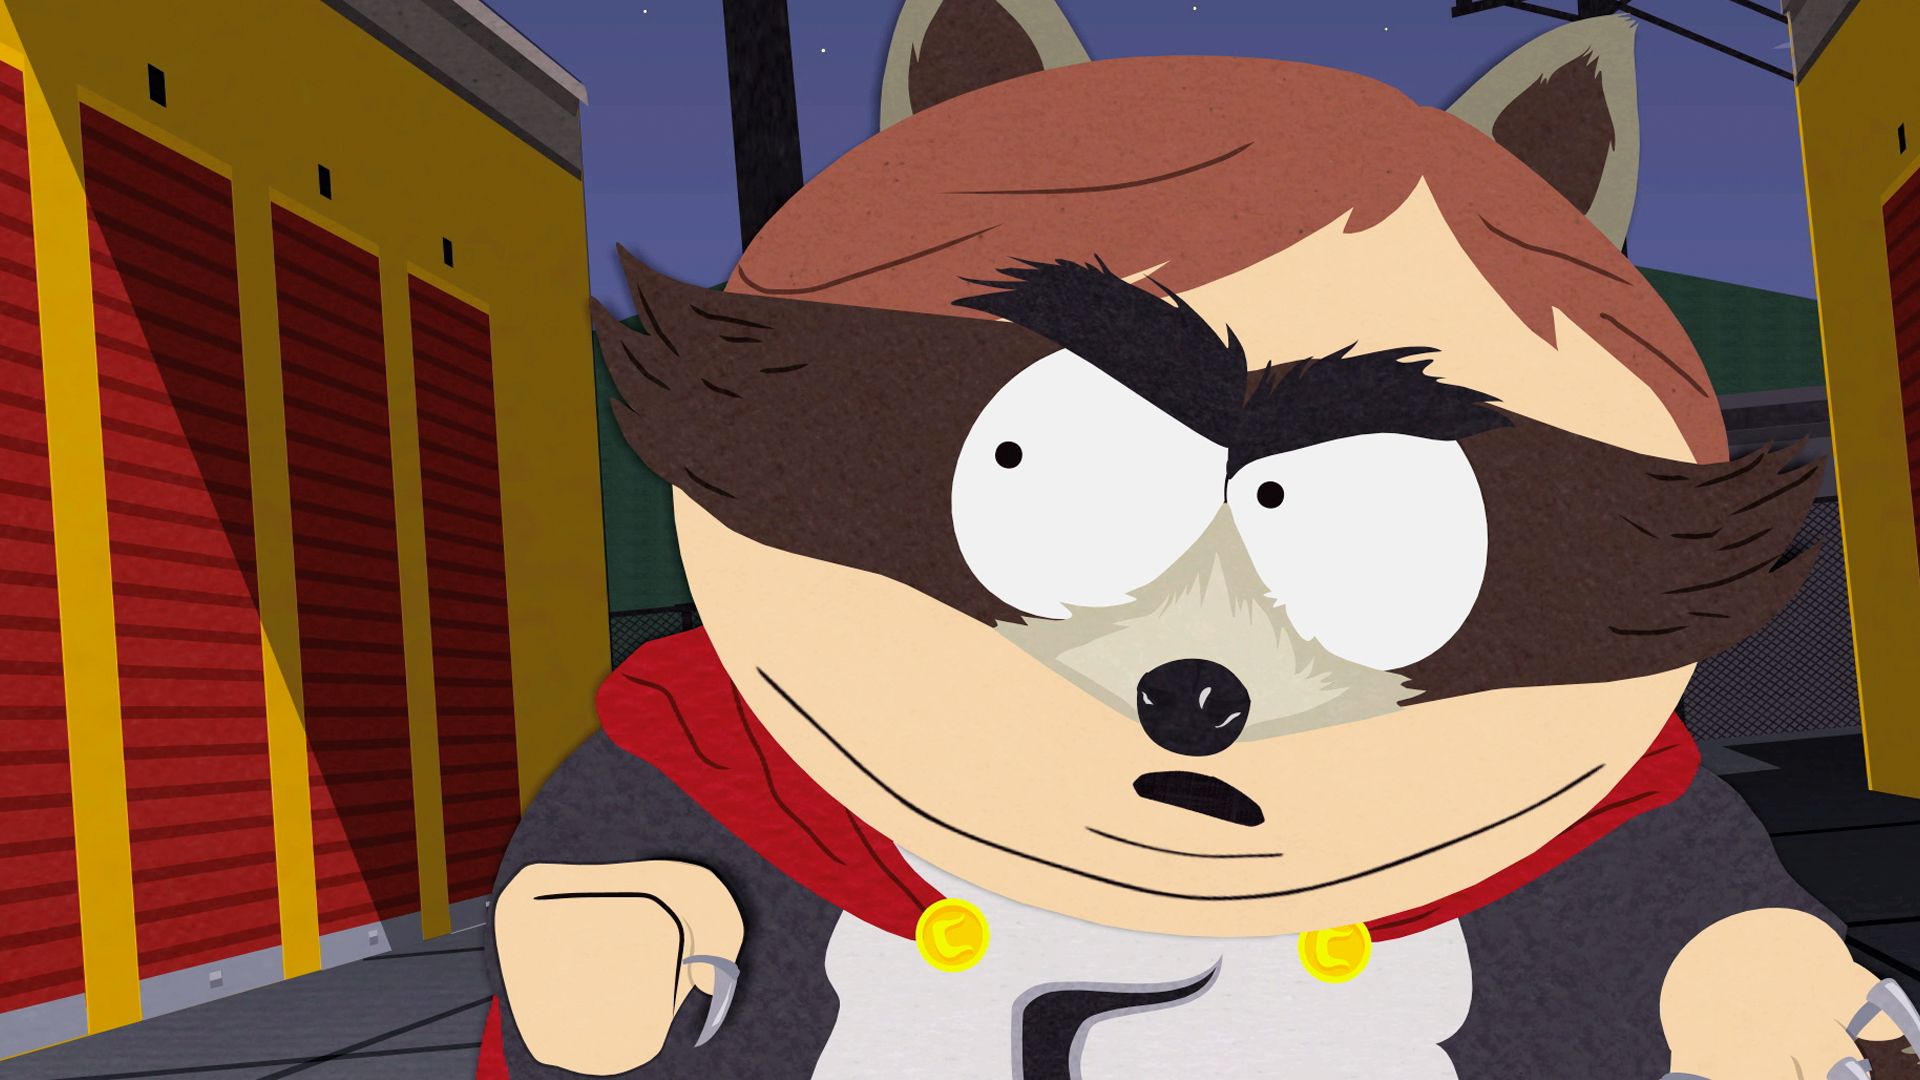 The Heroic and Mighty Coon - Season 13 Episode 2 - South Park